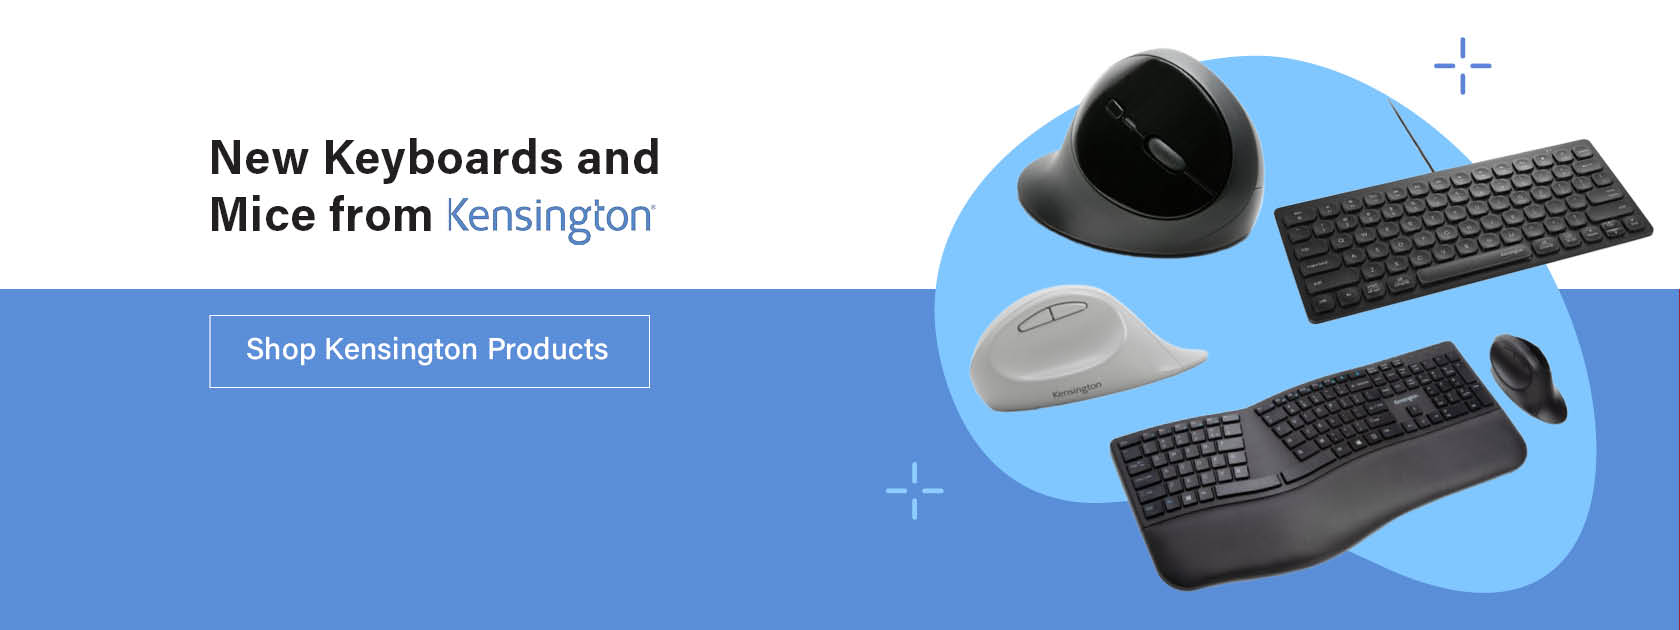 New Keyboards and Mice from Kensington Banner